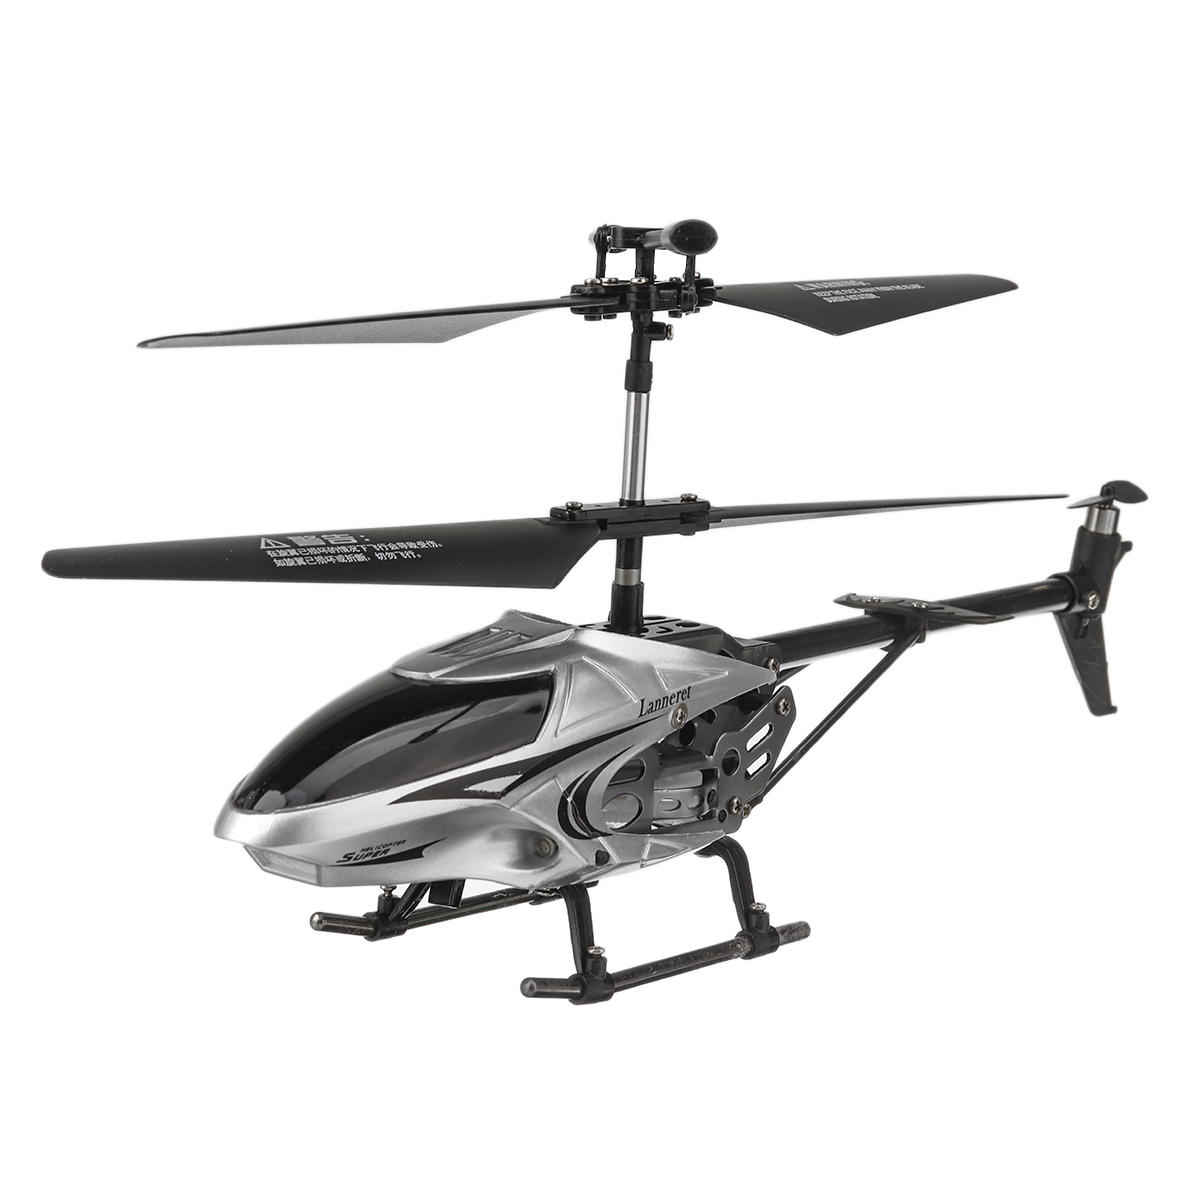 35CH-Alloy-Fall-Resistant-USB-Charging-Lock-tail-Gyroscope-Remote-Control-Helicopter-1846822-6